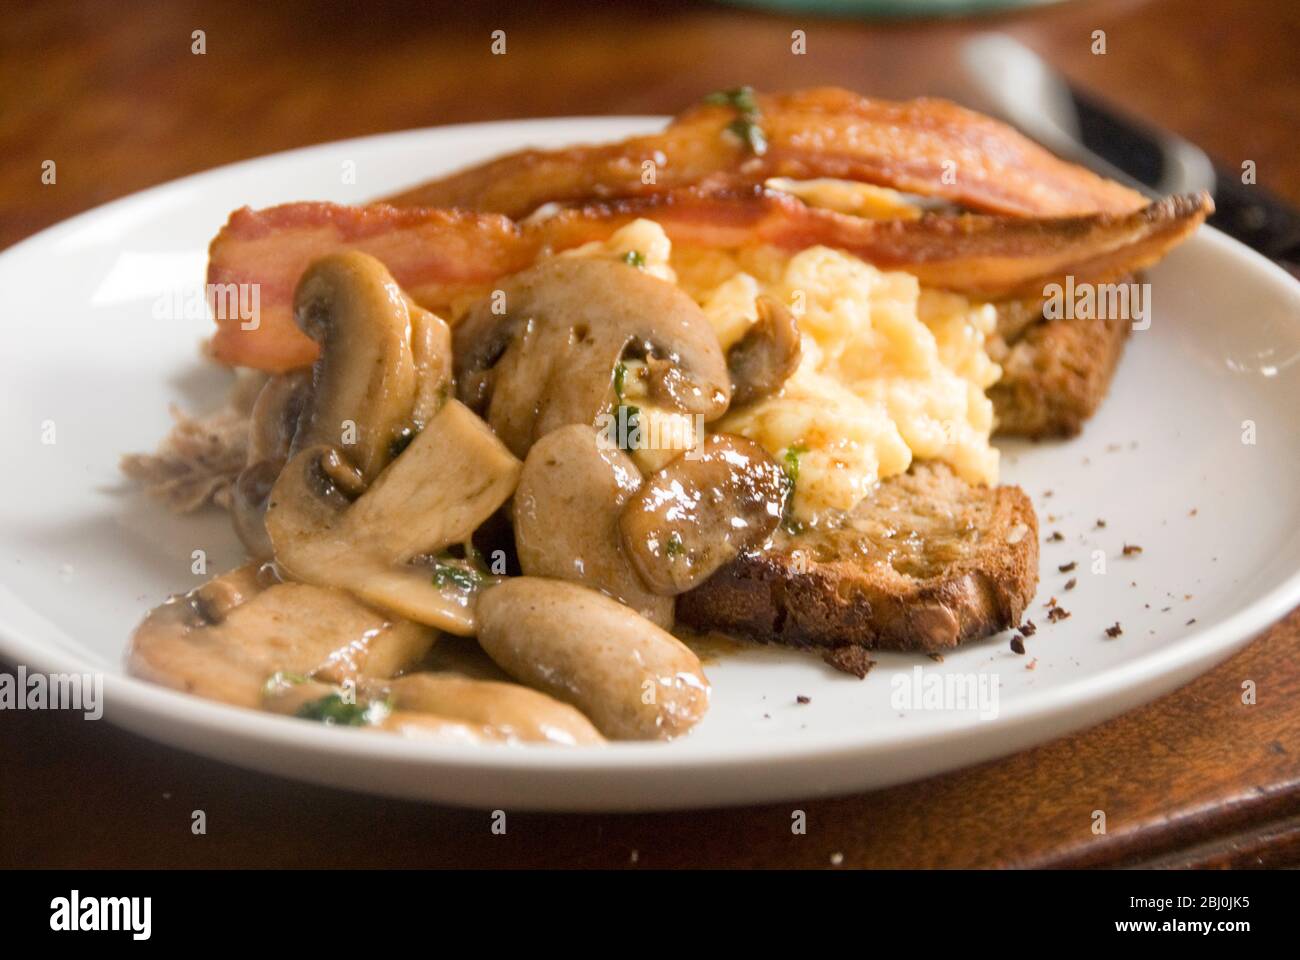 Breakfast plate of mushrooms and scrambled eggs on wholemeal seeded bread with streaky bacon rashers and freshly ground black pepper - Stock Photo